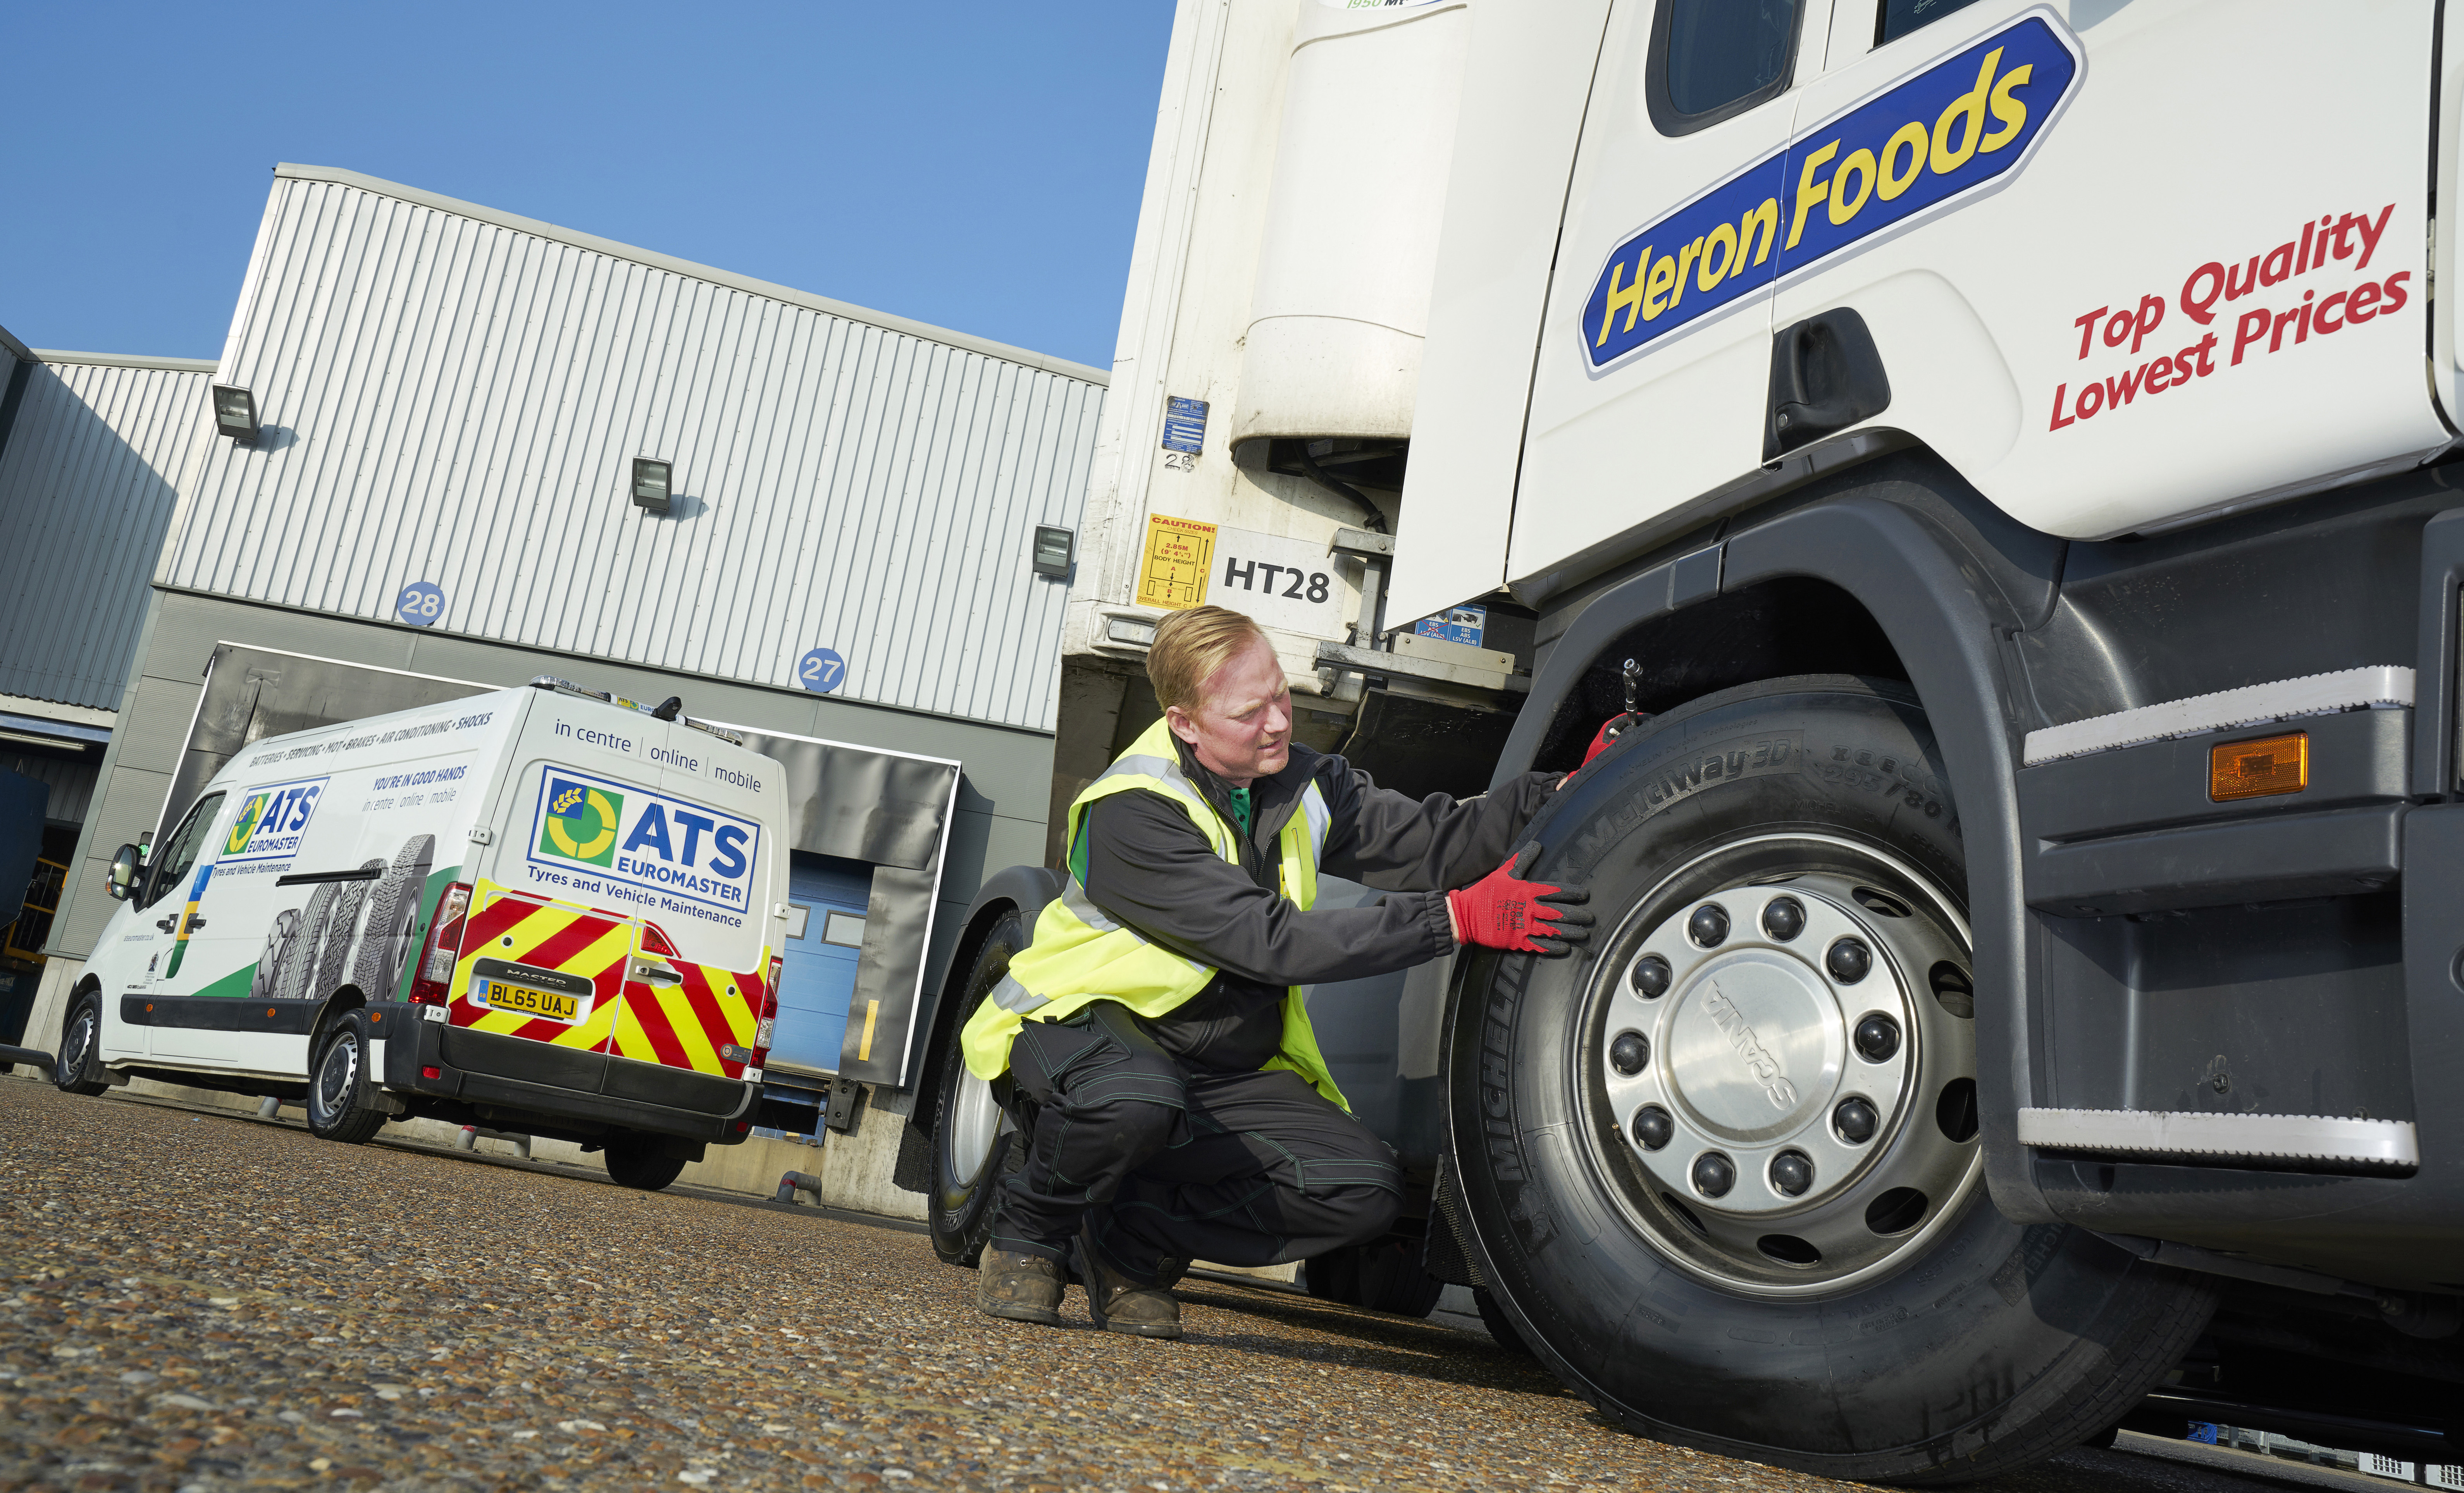 ATS EUROMASTER CUTS COSTS AND BOOSTS BUSINESS FOR HERON FOODS UK HAULIER NEWS